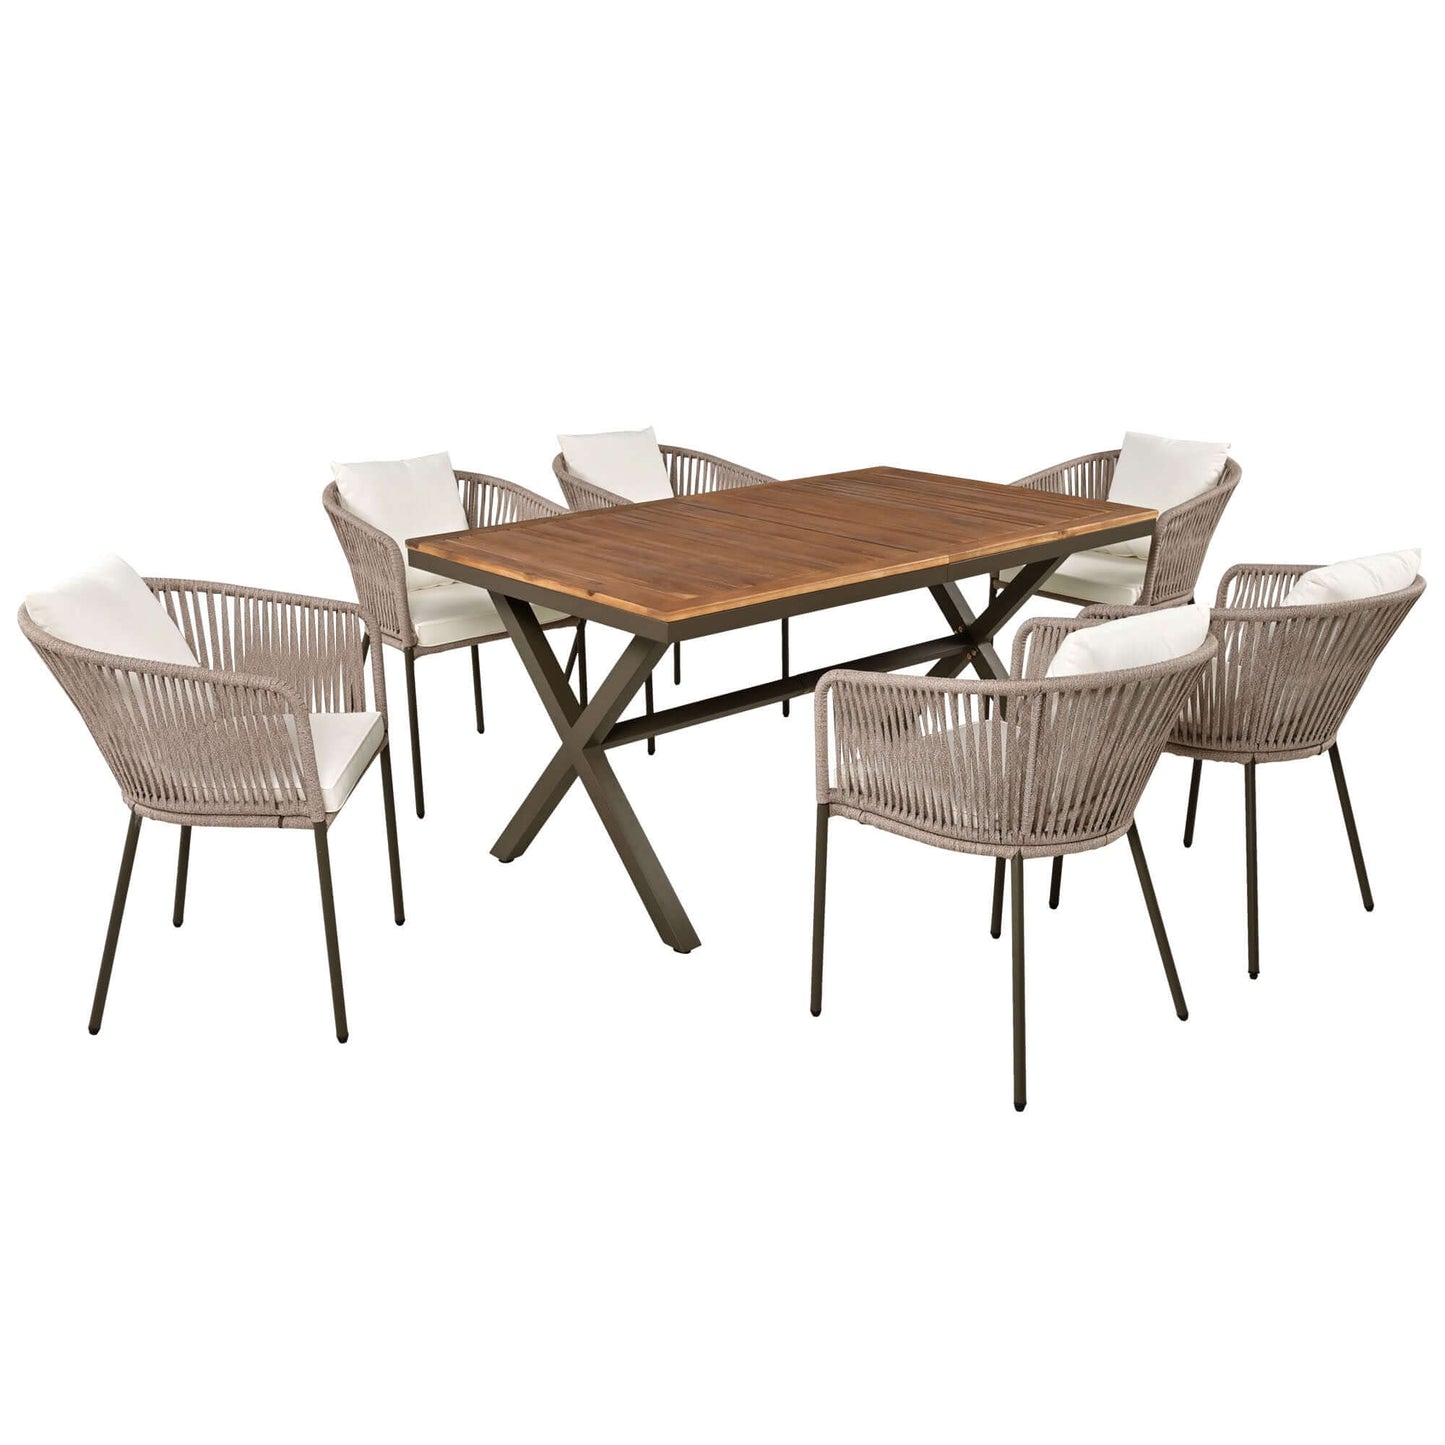 GO 7 Pieces Patio Dining Set with Acacia Wood Tabletop, Beige Cushions, Metal Frame for Garden, Backyard, Balcony.